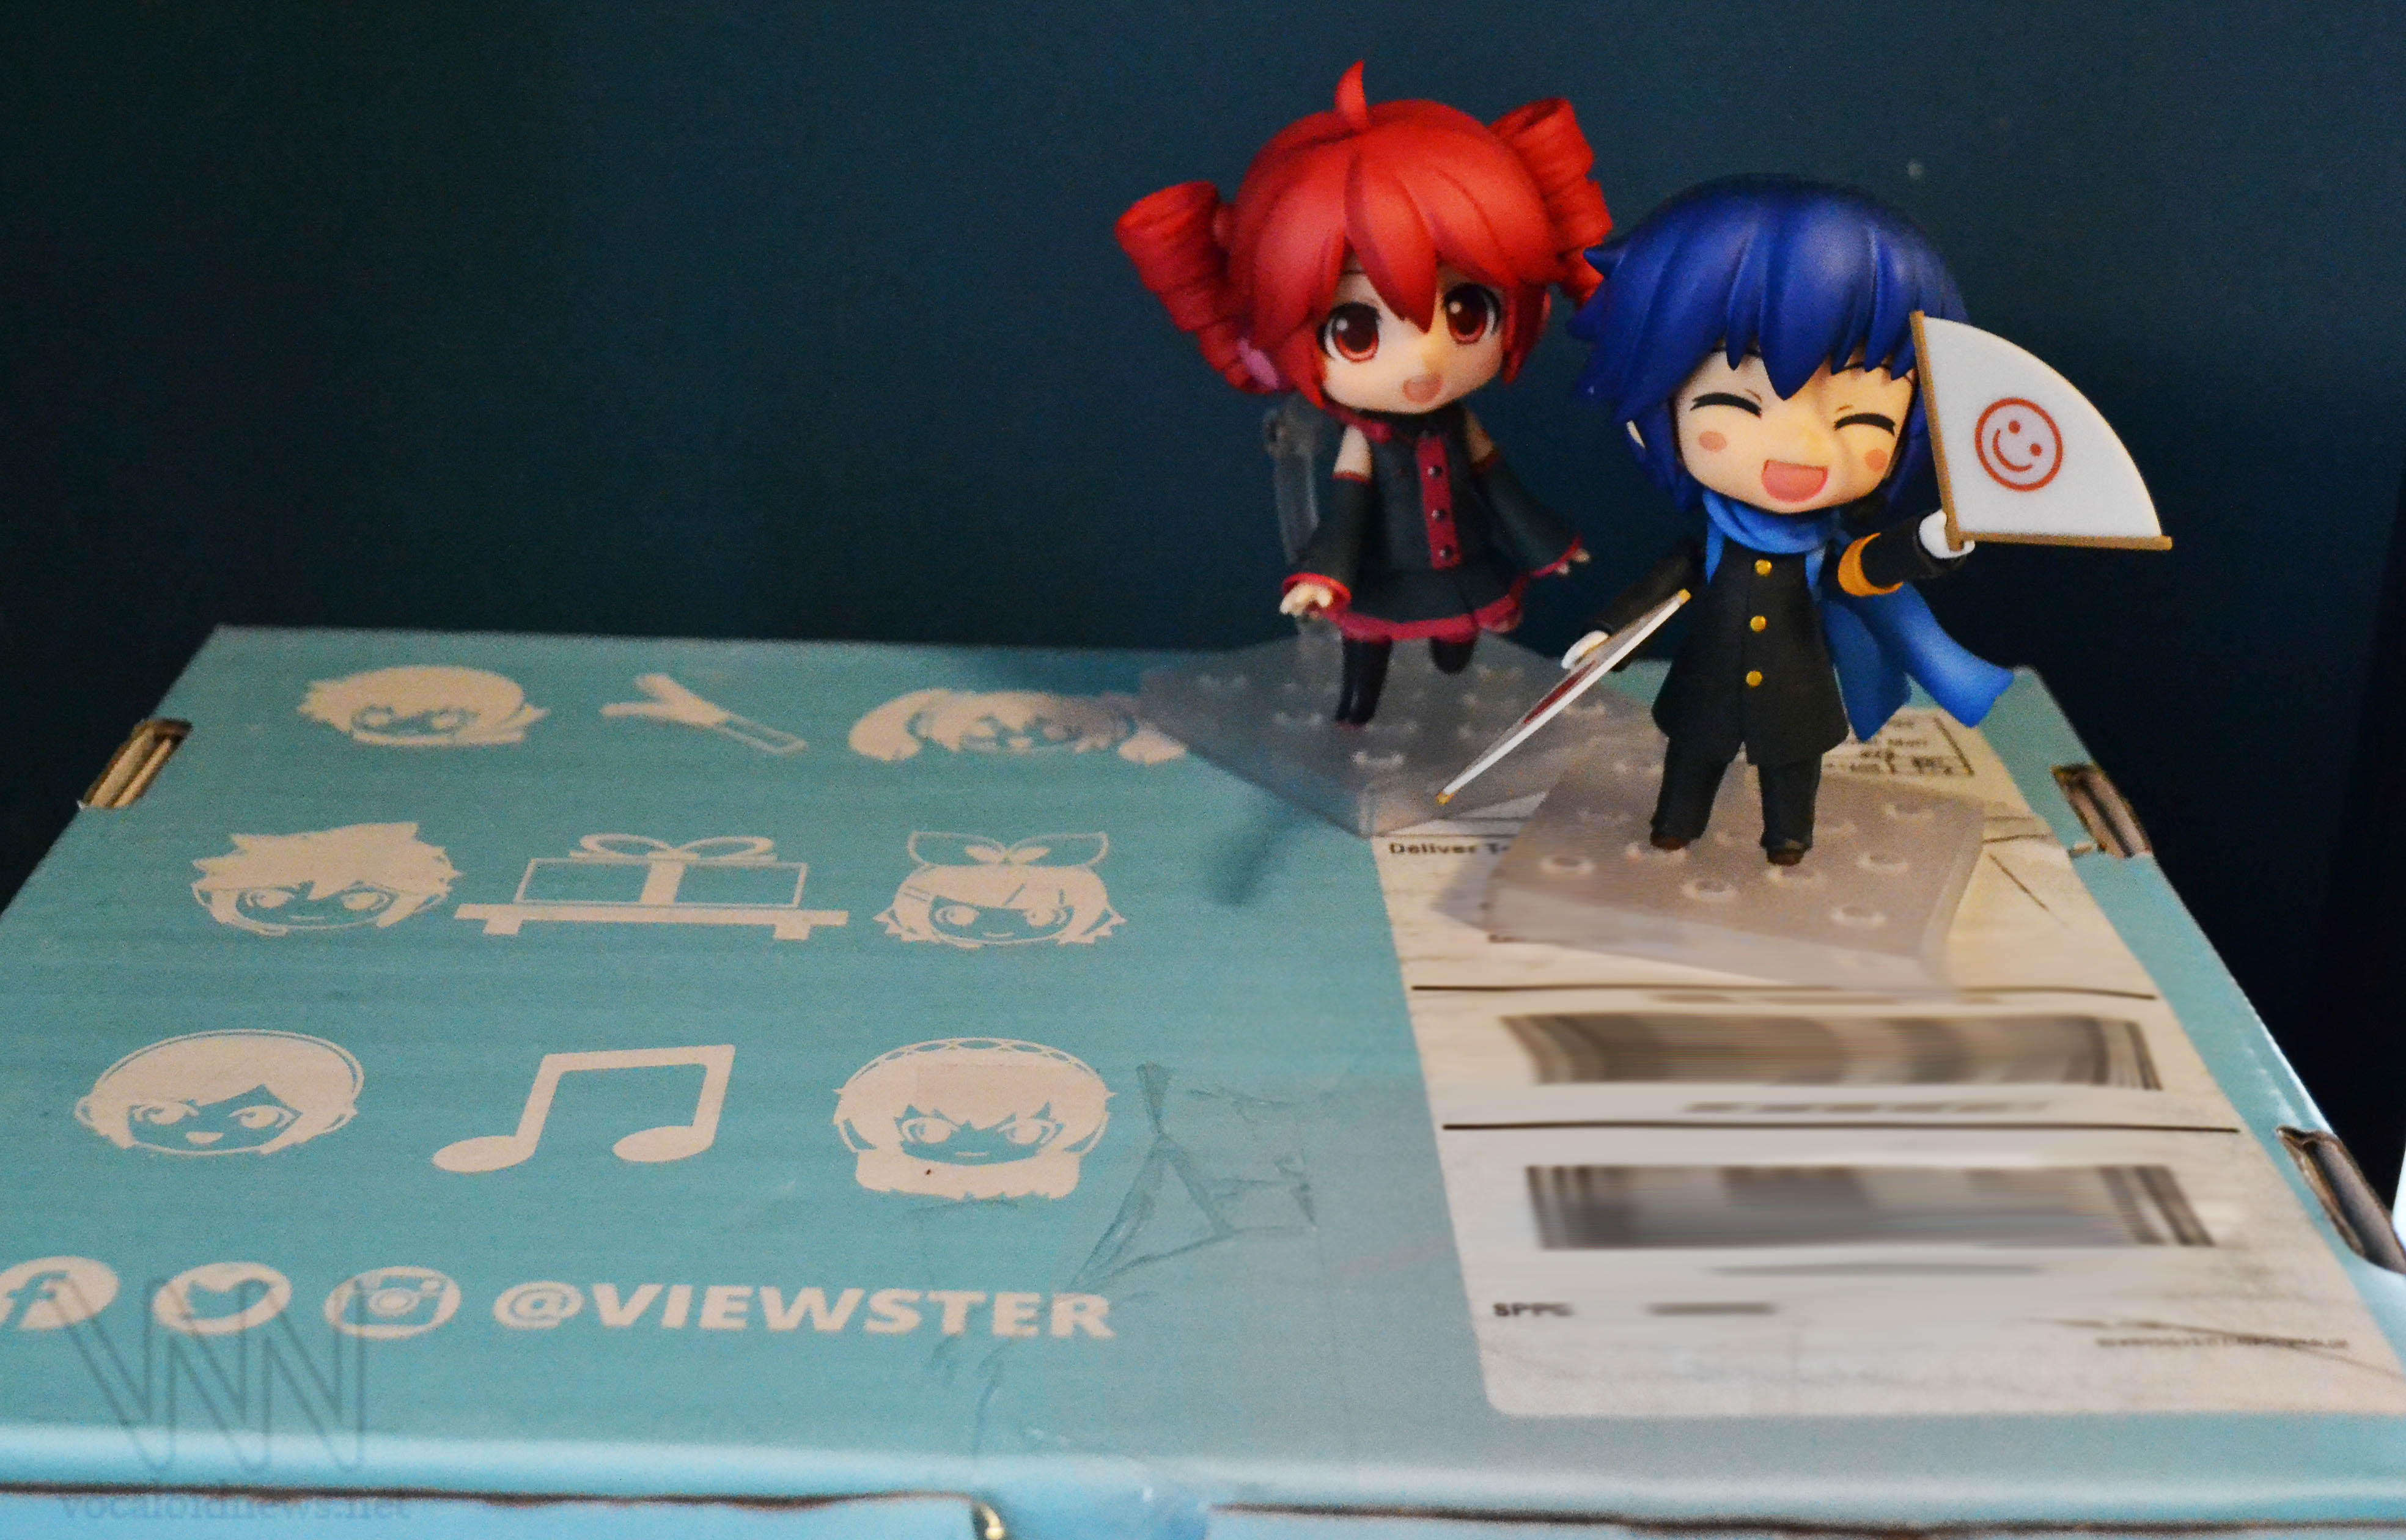 The box itself. (Nendos are for scale and an increased level of cuteness)